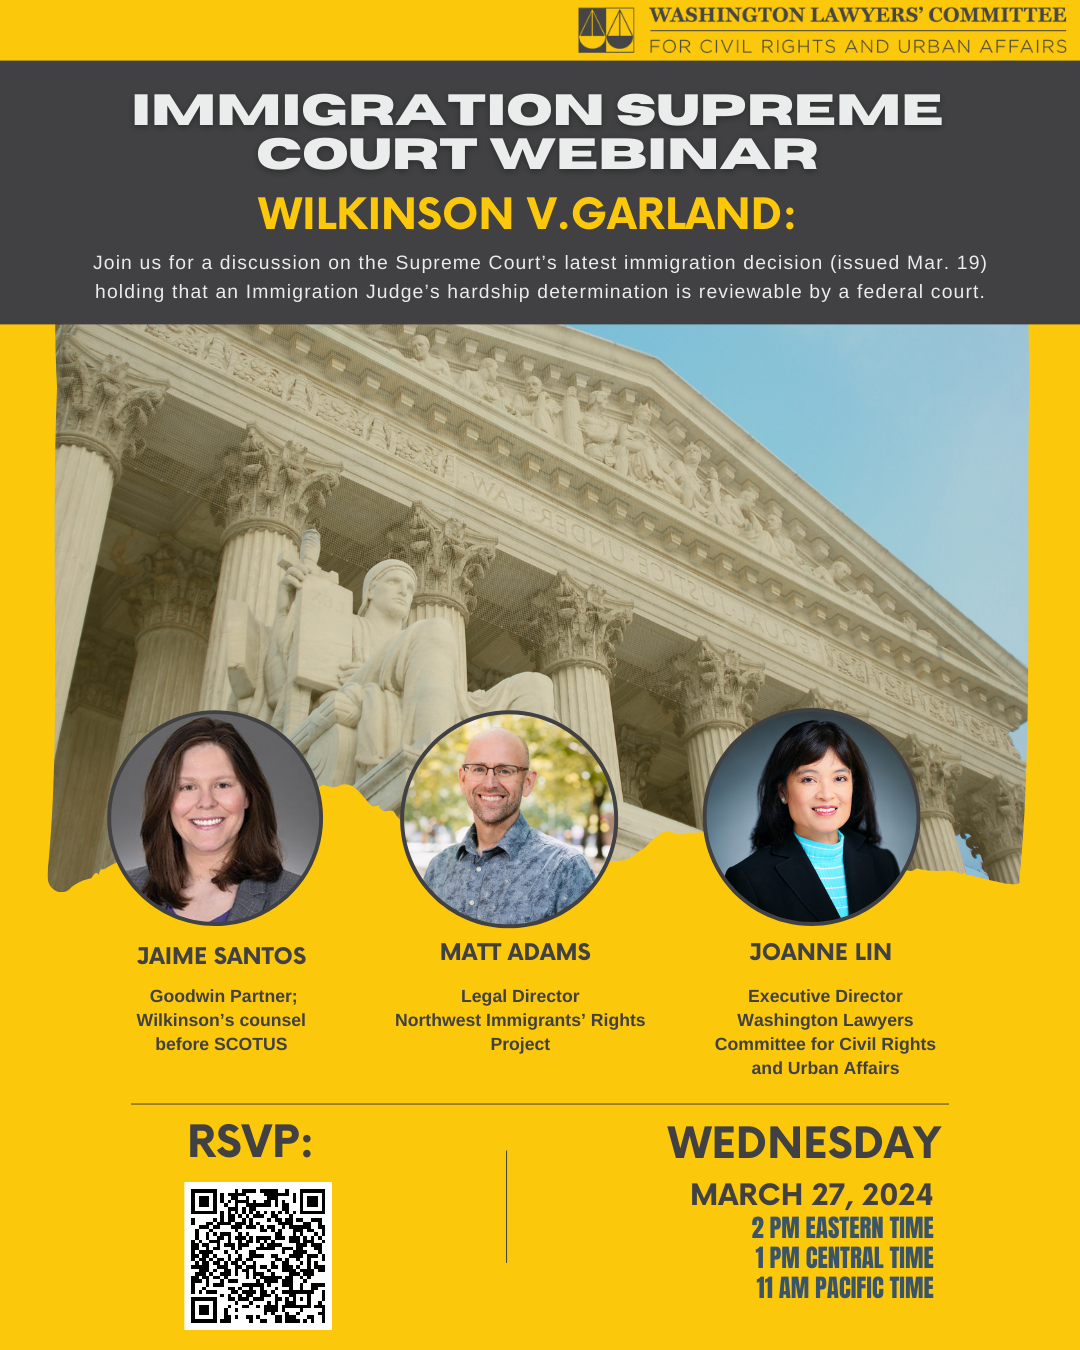 Yellow graphic with black and white text that reads "Immigration Supreme Court Webinar Wilkinson v. Garland: Join us for a discussion on the Supreme Court’s latest immigration decision (issued Mar. 19) holding that an Immigration Judge’s hardship determination is reviewable by a federal court. Jaime Santos, Goodwin Partner; Wilkinson’s counsel before SCOTUS; Matt Adams, Legal Director, Northwest Immigrants’ Rights Project; Joanne Lin Executive Director Washington Lawyers Committee for Civil Rights and Urban Affairs March 27, 2024, 2 pm Eastern Time, 1 PM Central time, 11 am Pacific time." A QR code to RSVP and photos of each speaker are also included.